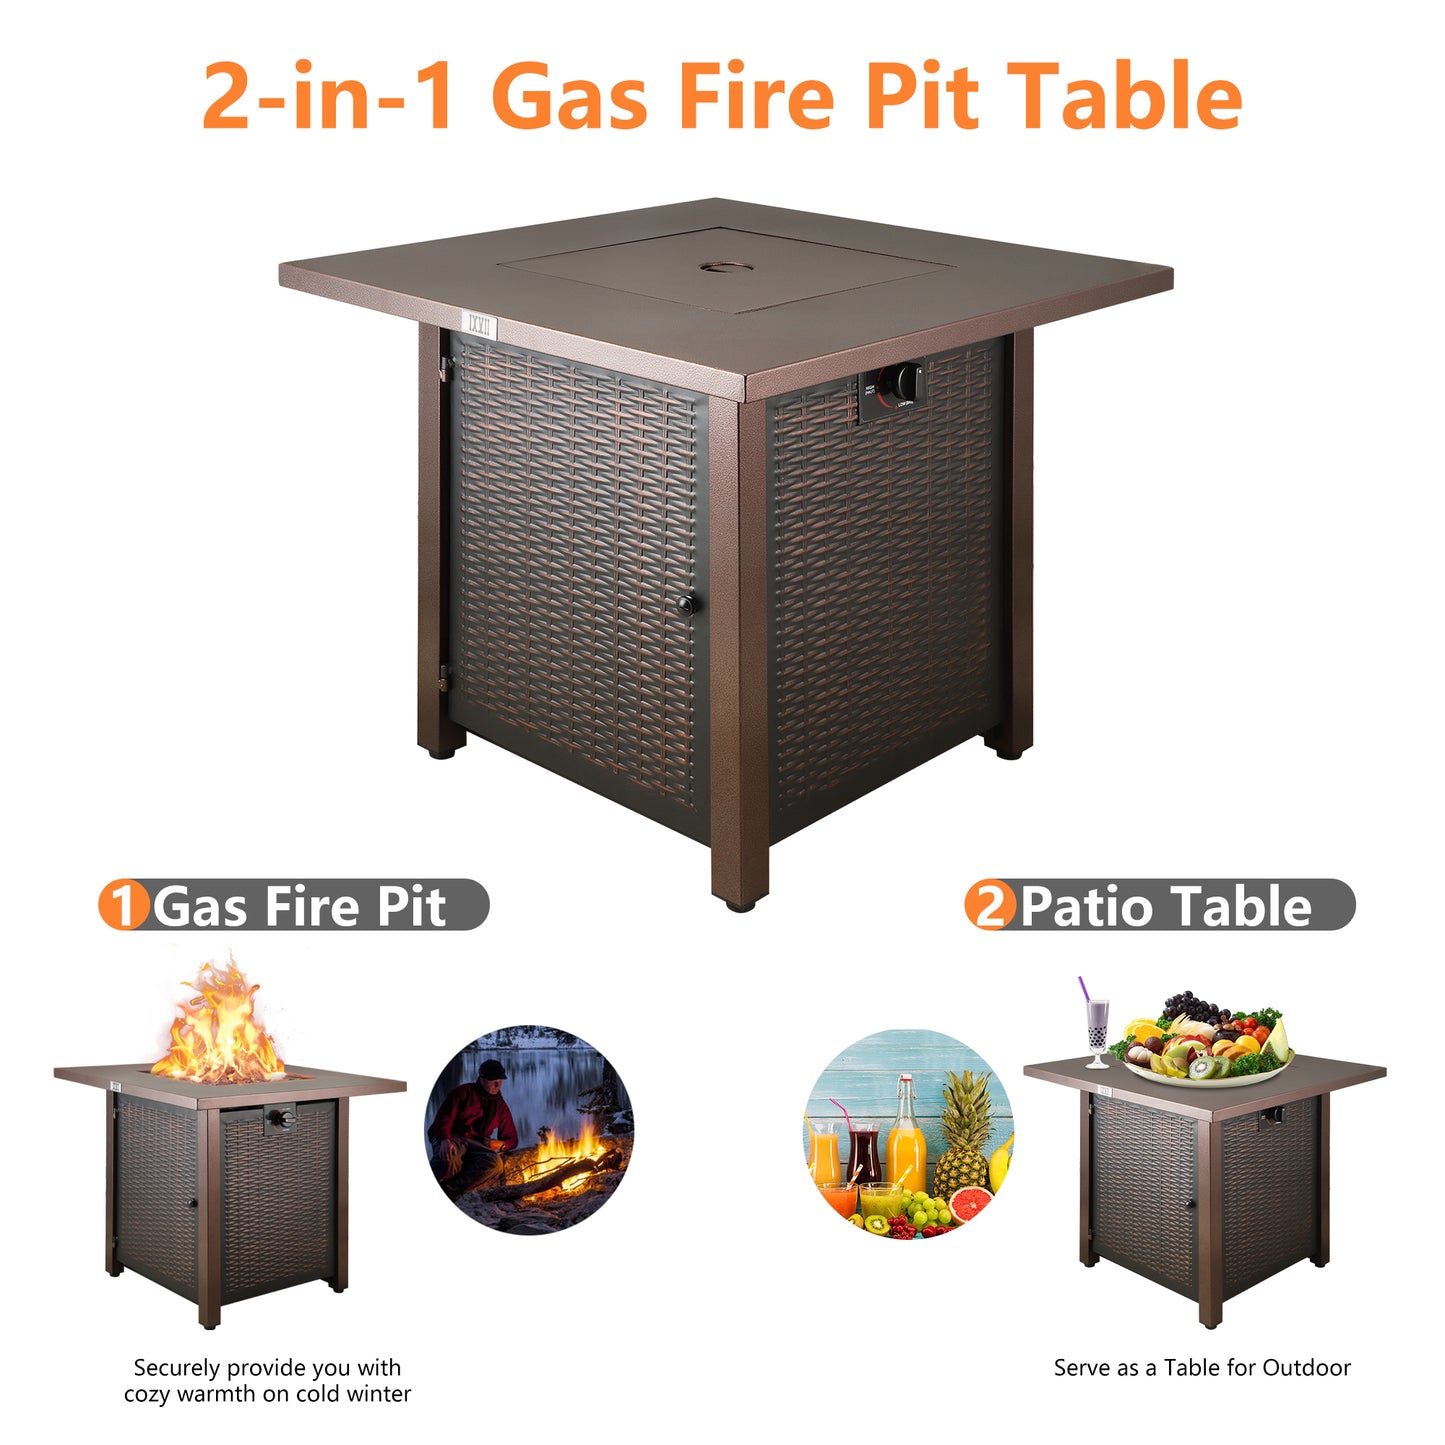 28 inch Gas Fire Pit Table, SYNGAR 2-in-1 40,000 BTU Propane Gas Fire Pit Table, Outdoor Propane Fire Pit with Lid and Lava Rock, for Patio, Backyard, Garden, Poolside, Y028